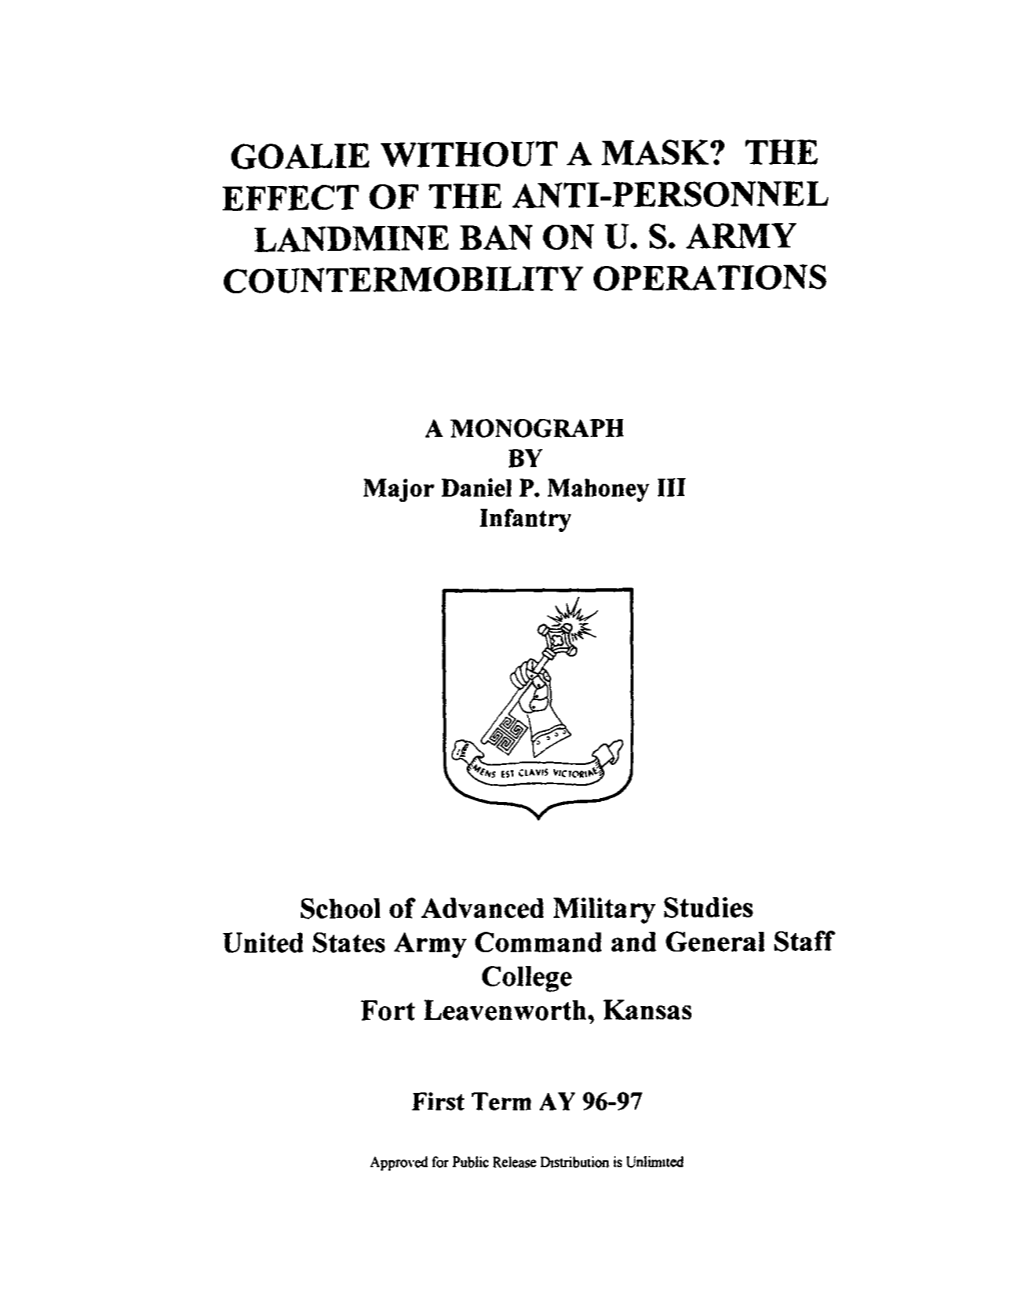 The Effect of the Anti-Personnel Landmine Ban on U